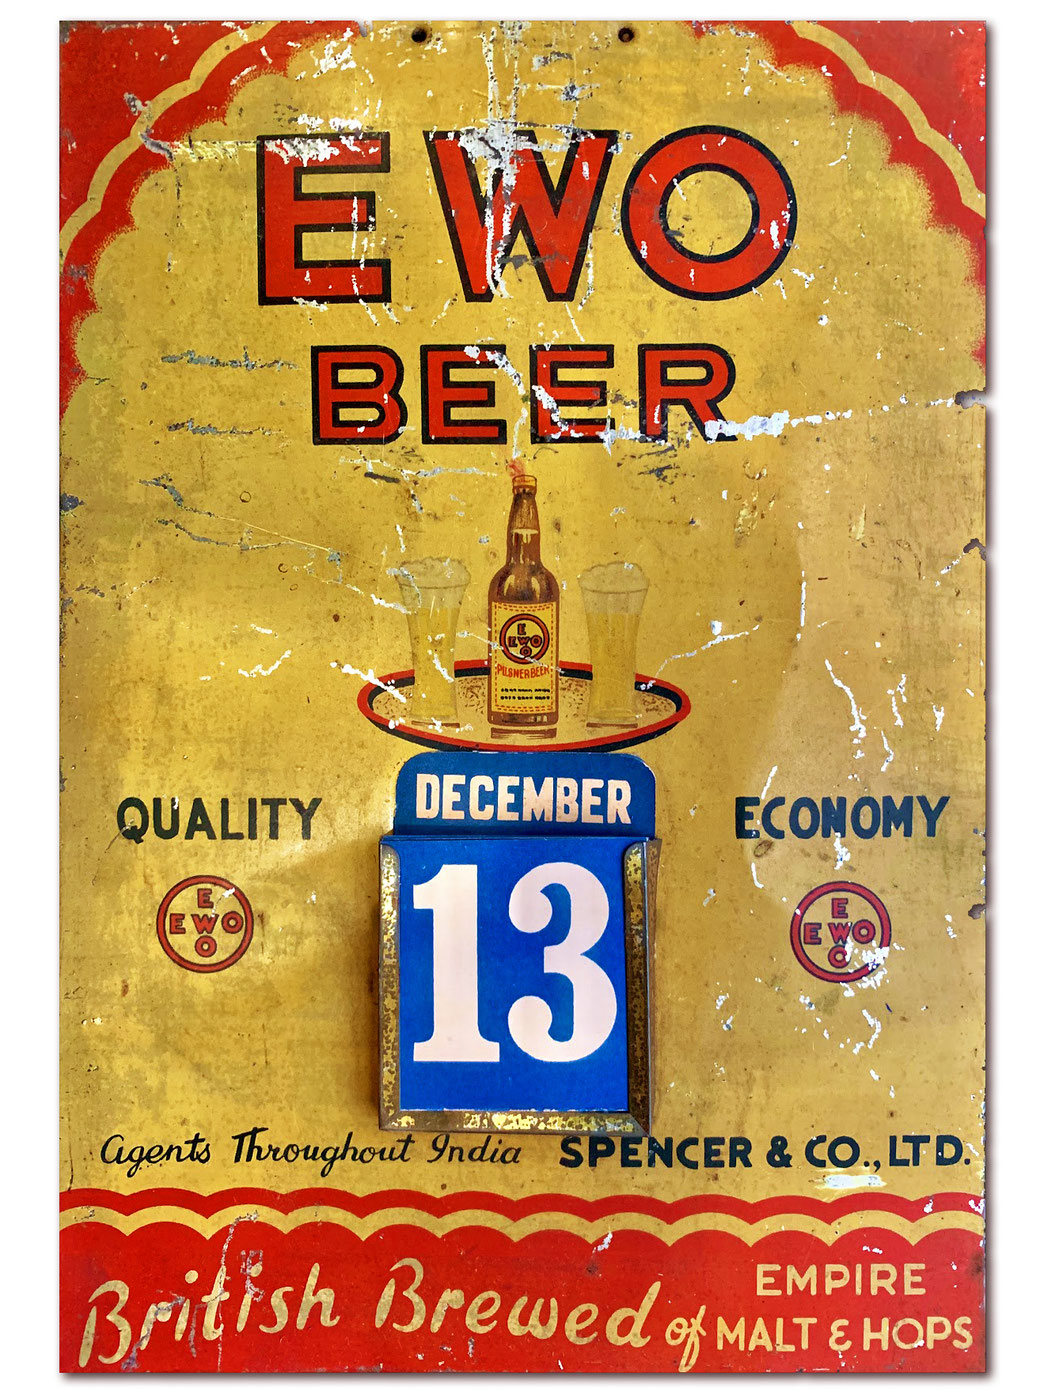 Vintage metal advertising calendar from India for EWO Beer, brewed in Shanghai China. From the MOFBA collection.